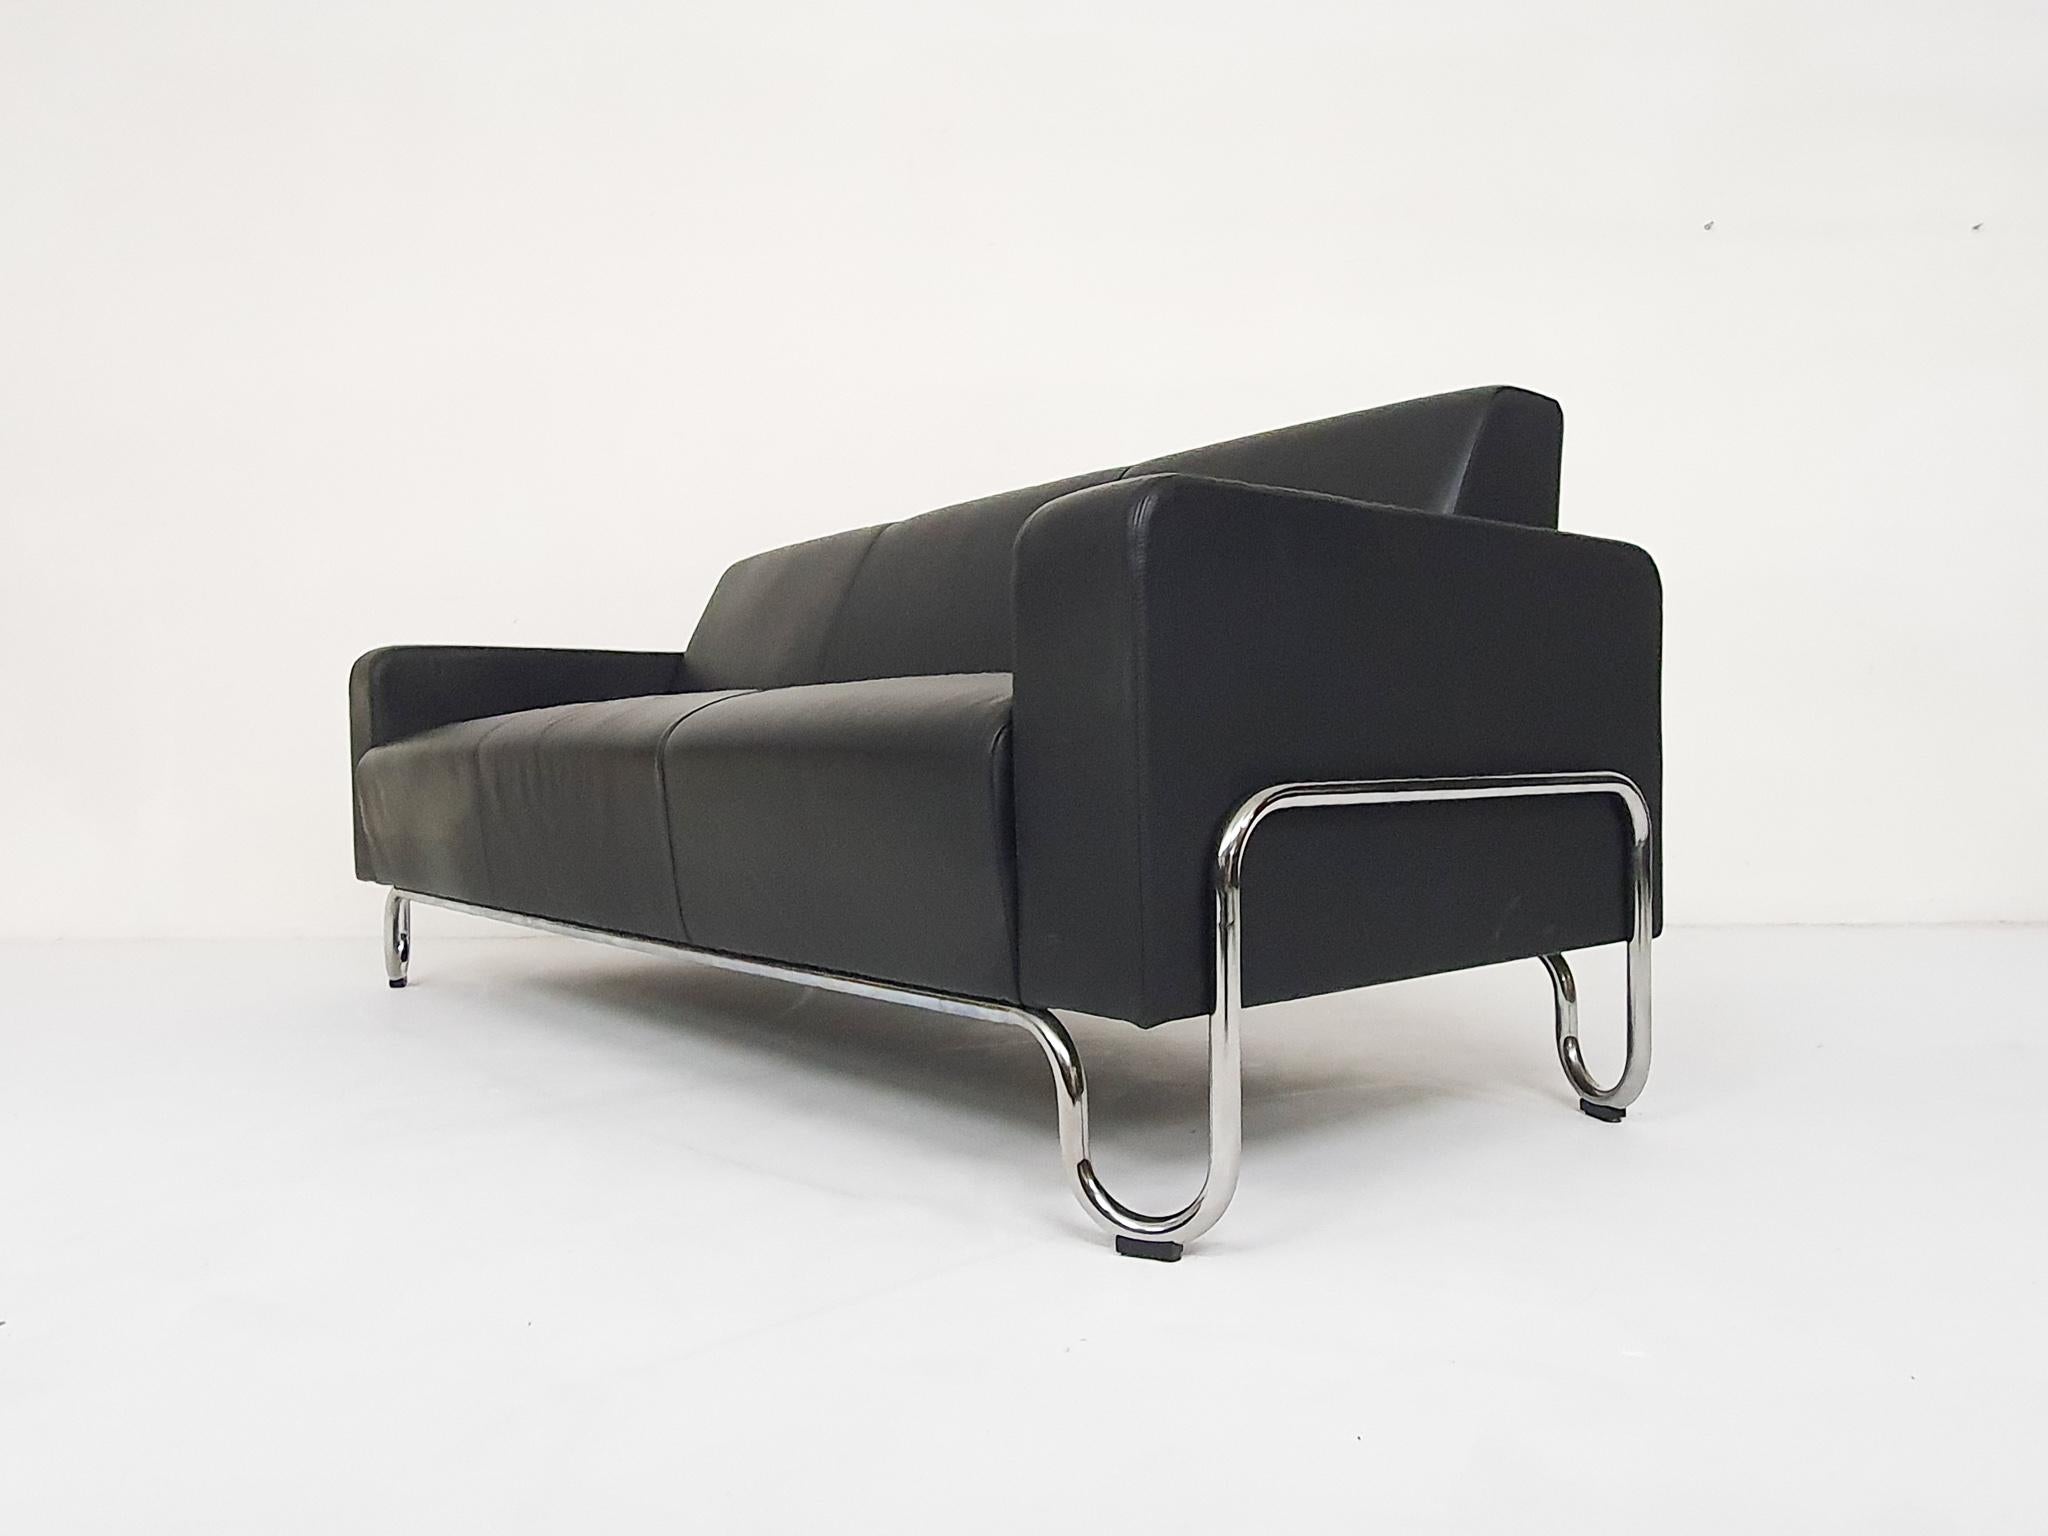 Black leather 3-seater sofa, from Gispen, manufactured by Dutch Originals. Model 441-3
On tubular metal frame.
Overall in good condition, only one scratch in the leather on the side. The frame has a few tiny rust spots.
Marked underneath and with